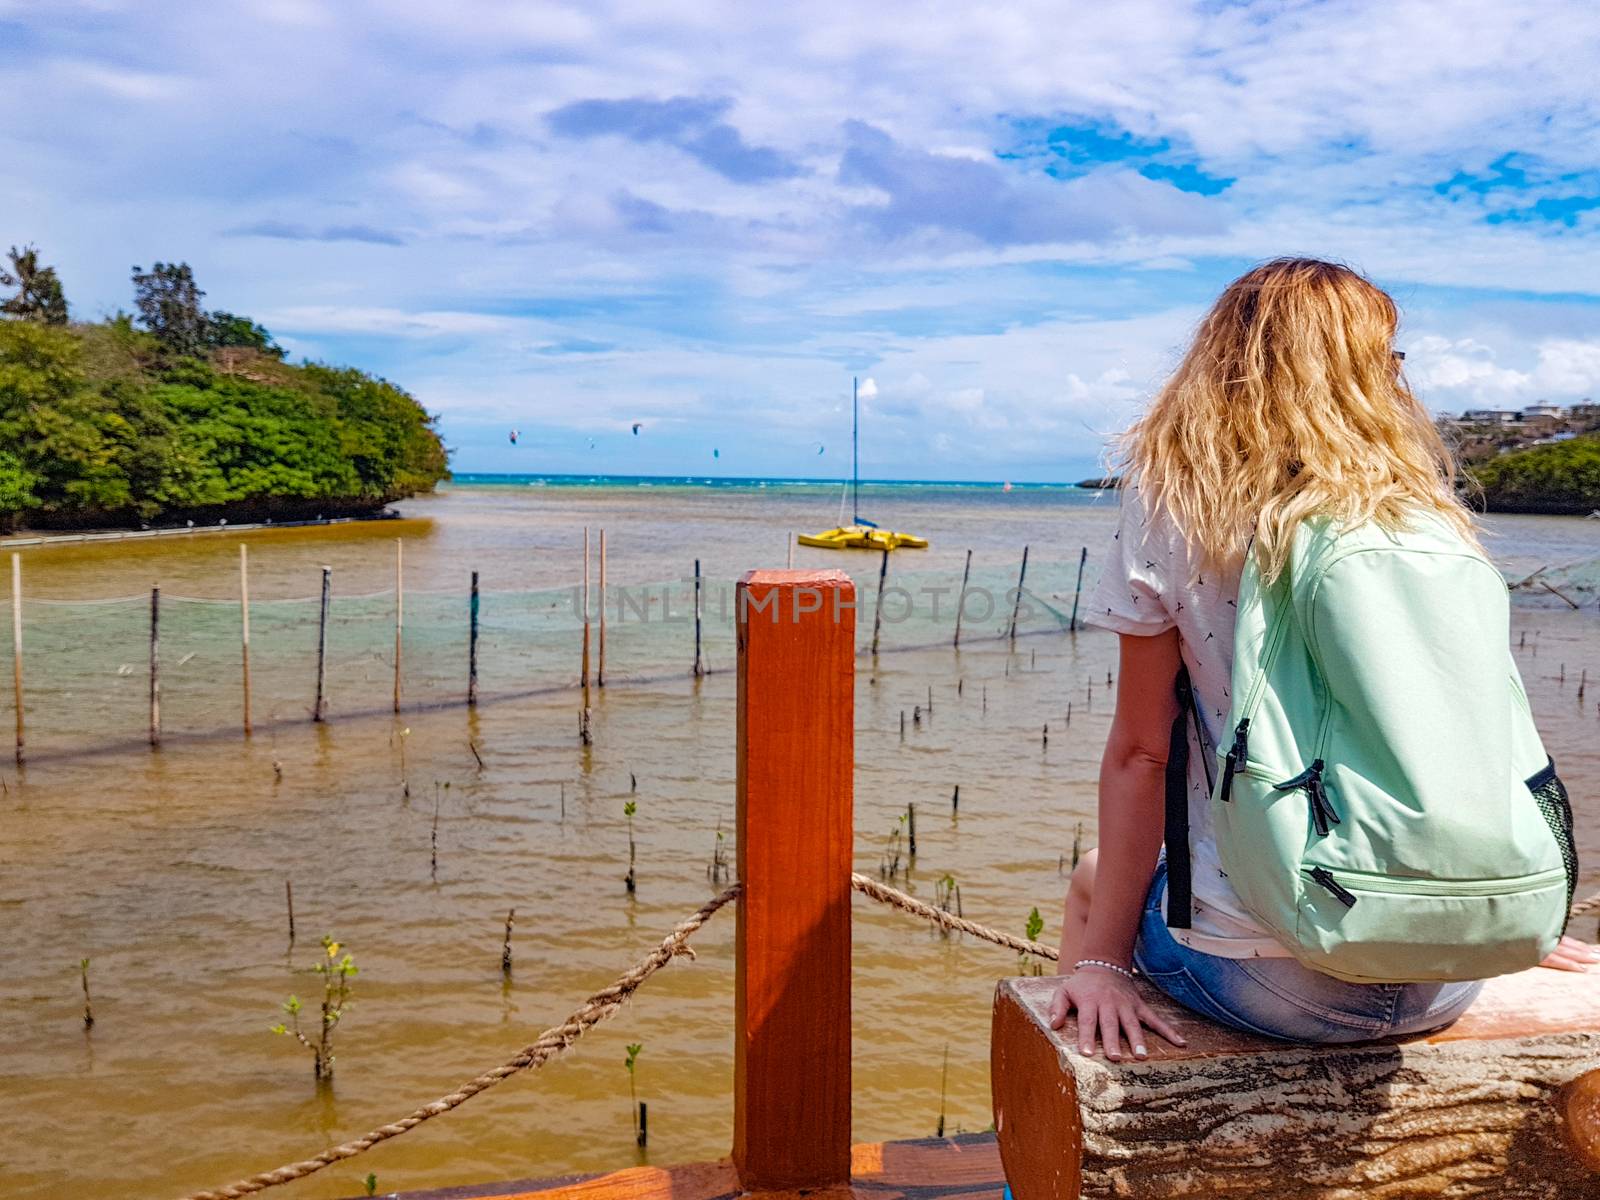 A girl with a backpack sits on a bench on the shore of Boracay island of the Philippines and looks at the thickets of mangroves in the water. Rear view. Follow me. by rdv27